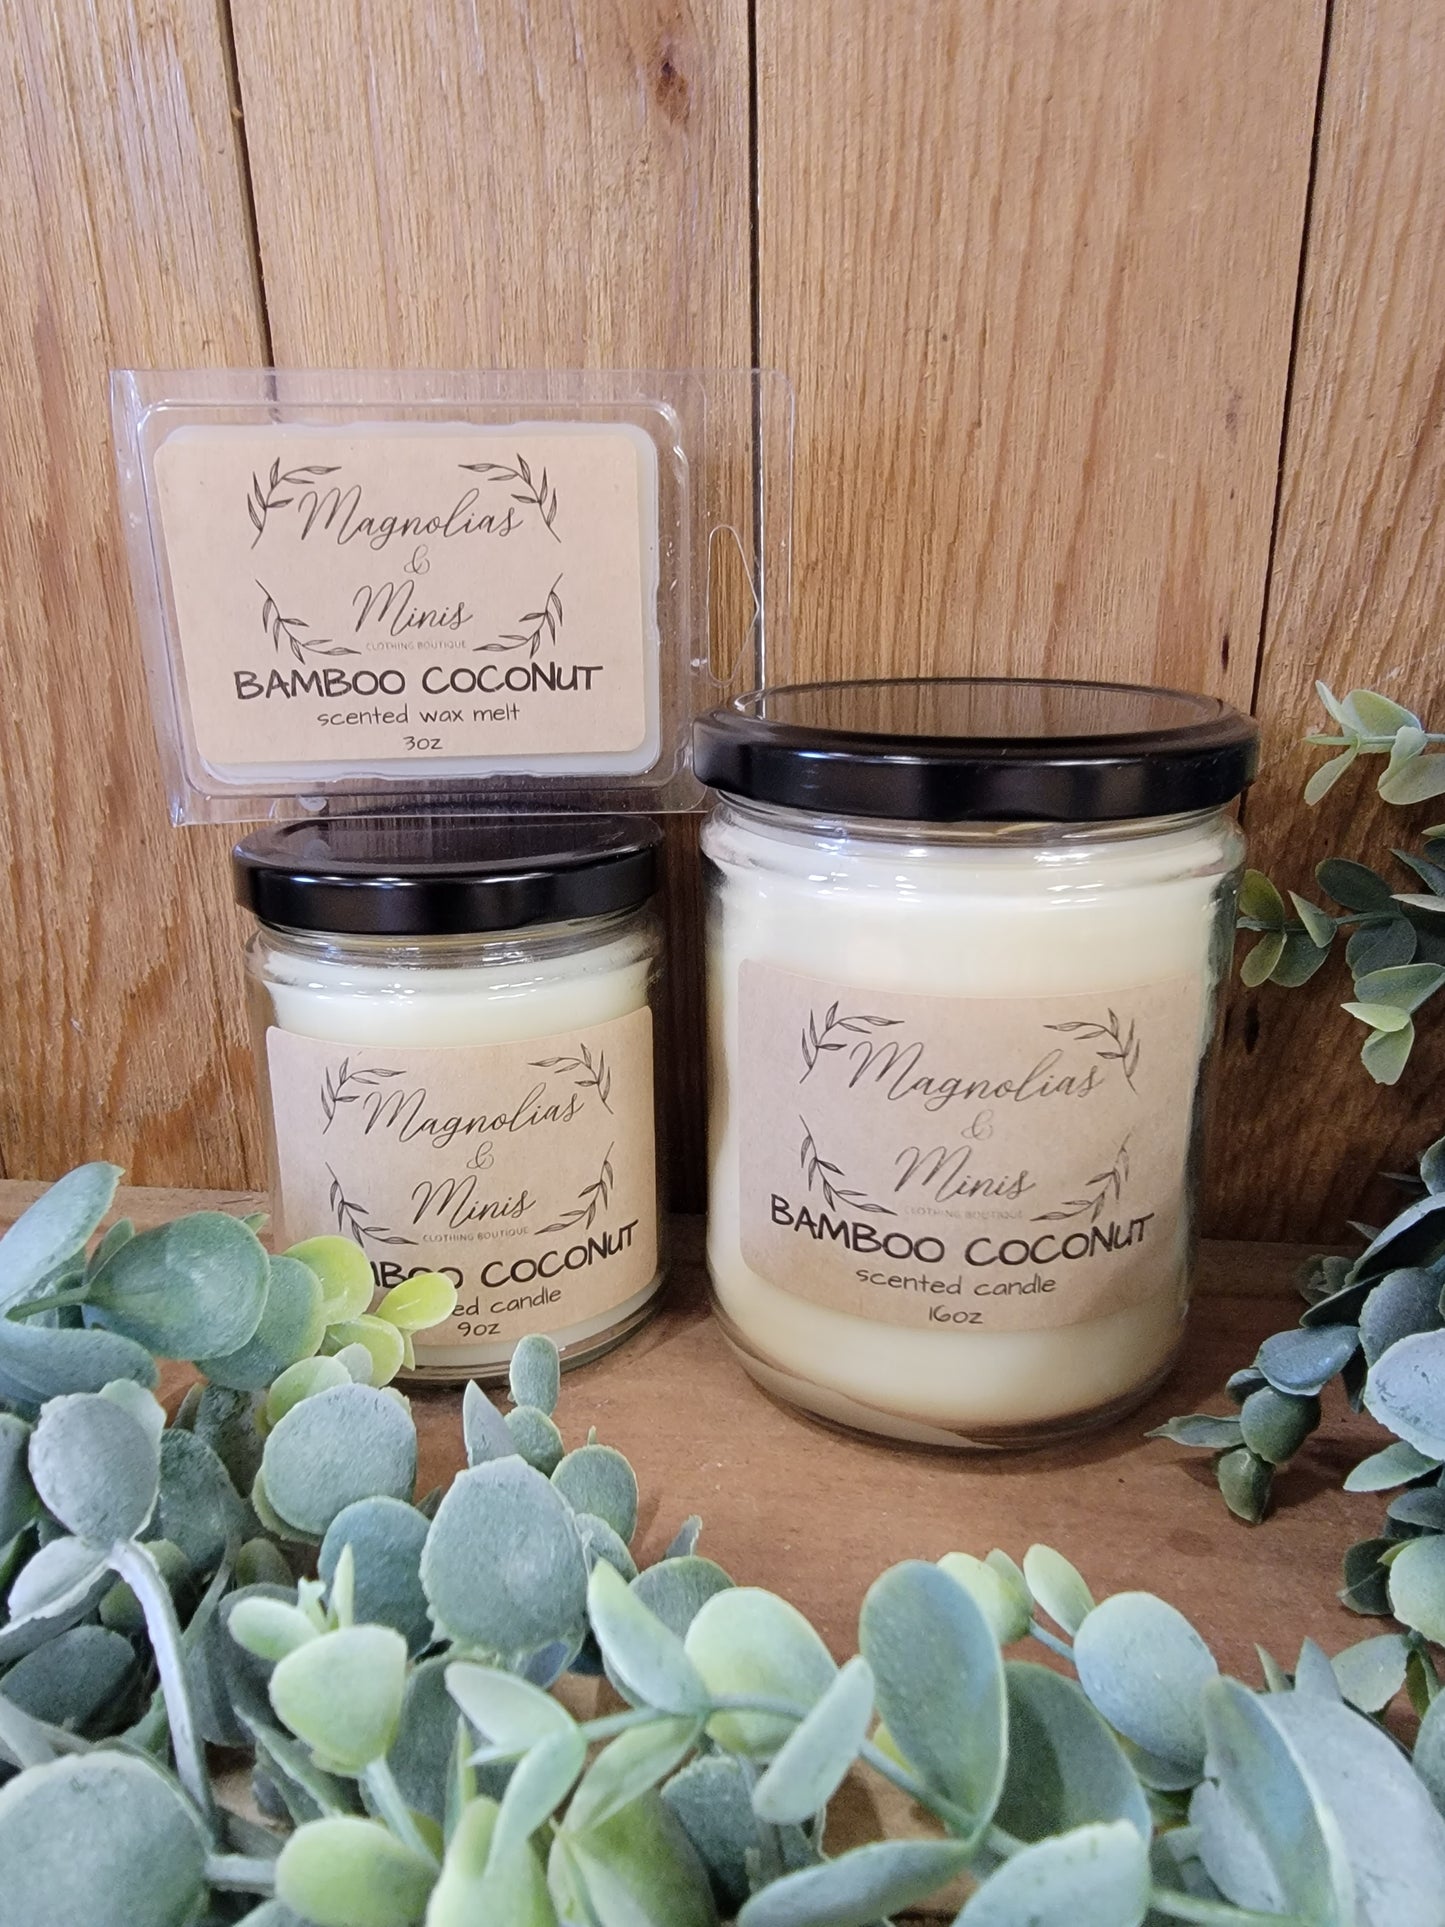 Bamboo Coconut 9oz candle